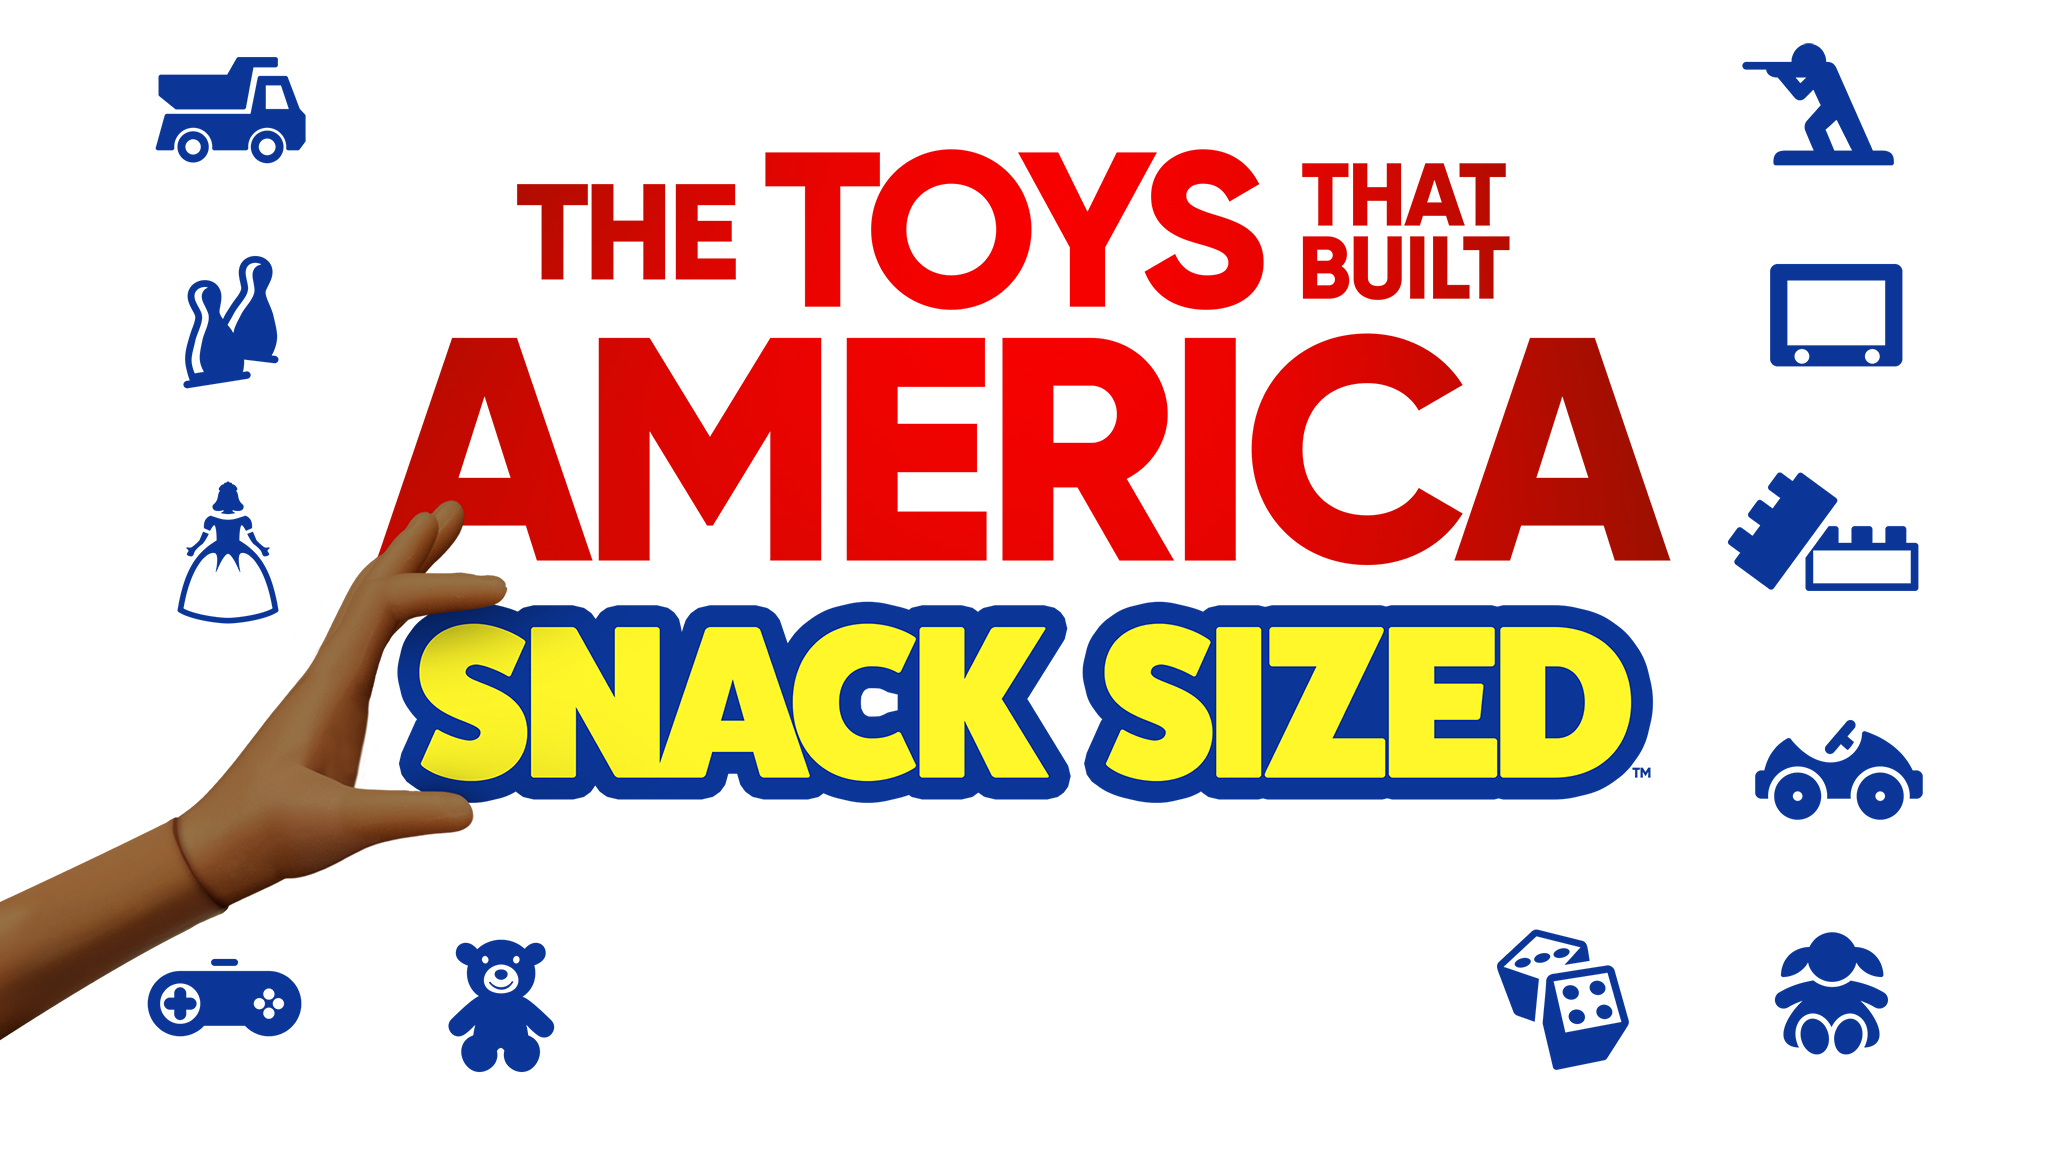 The Toys That Built America: Snack Sized 2X4